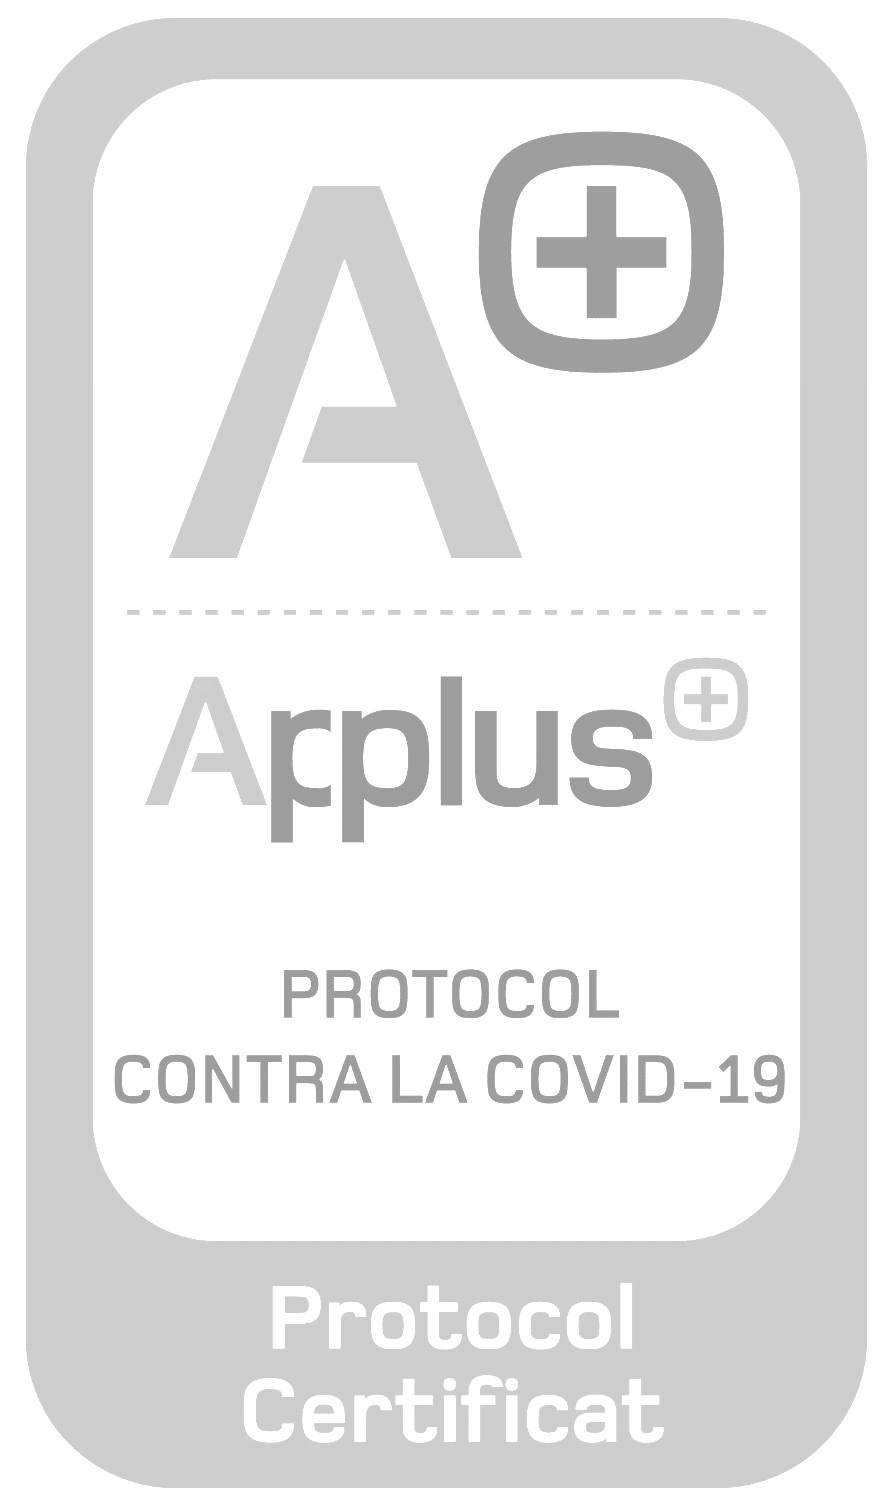 Applus Quality Seal in relation to COVID-19